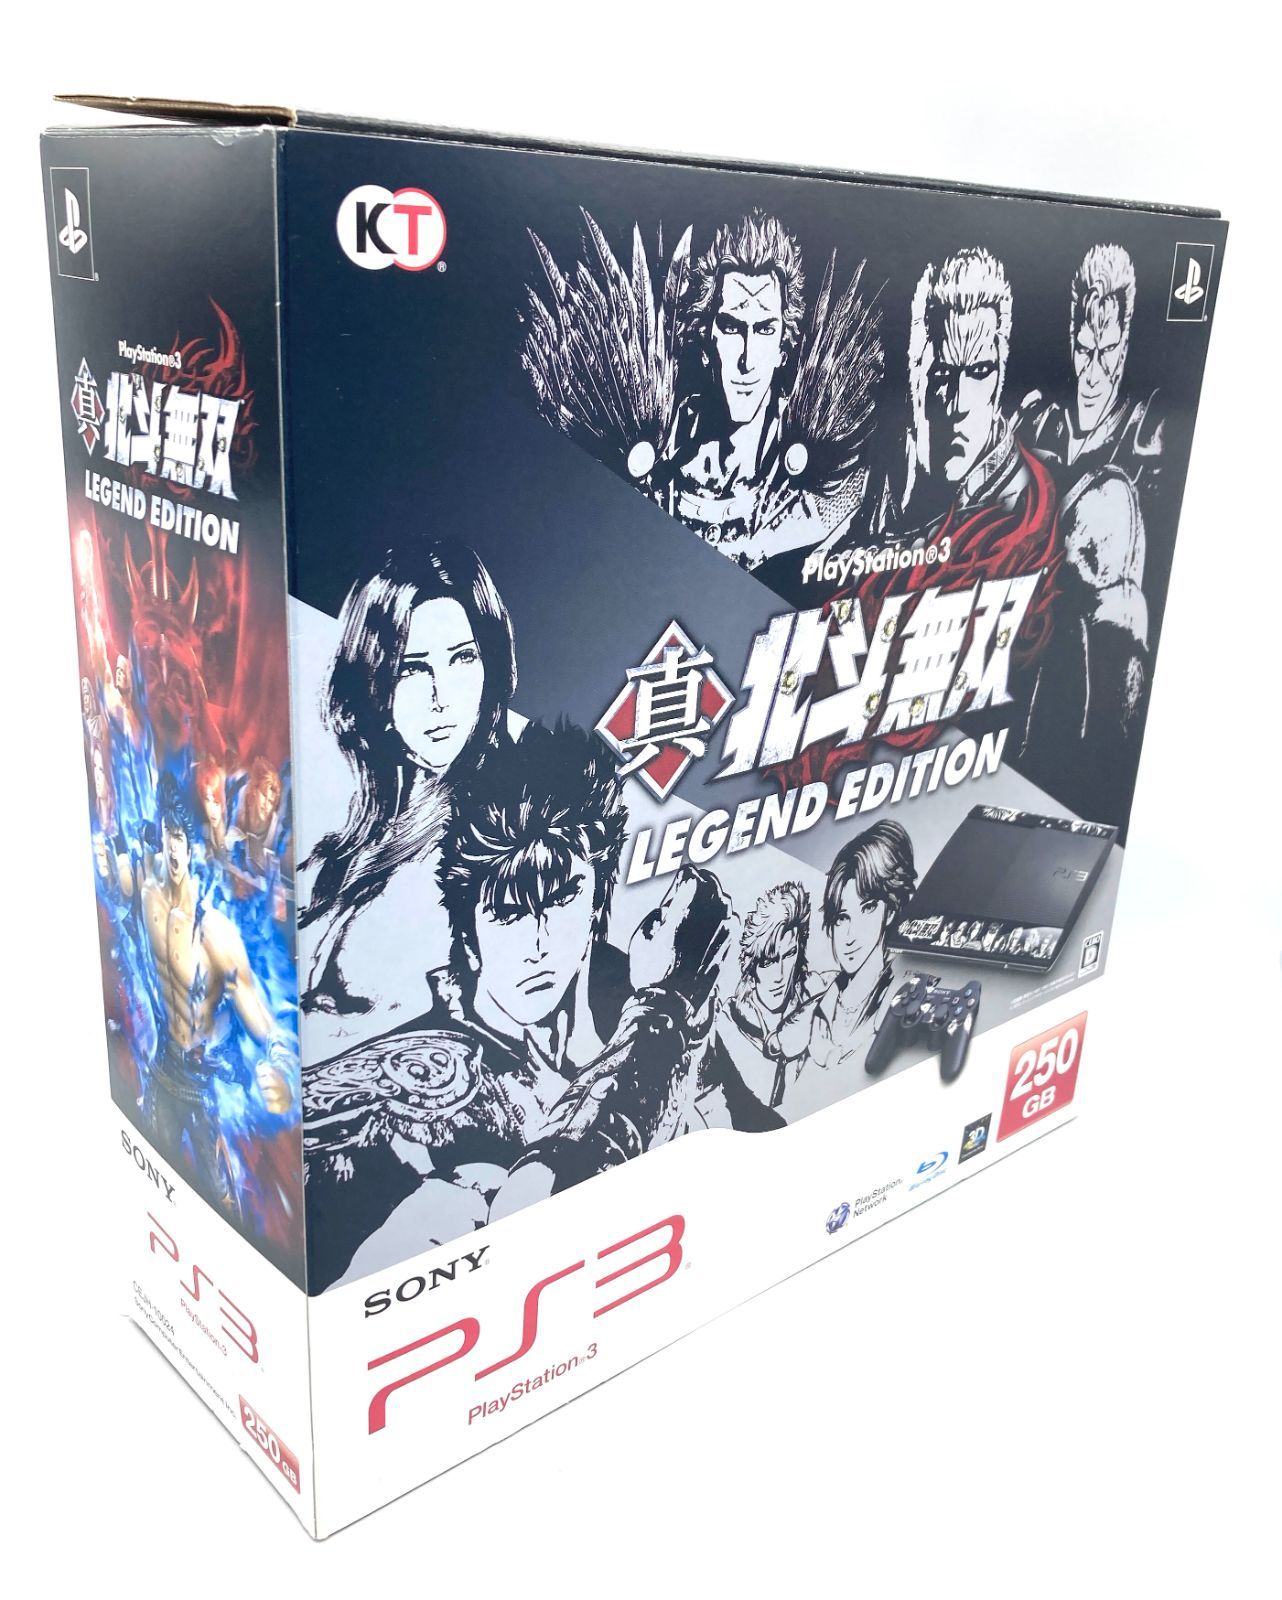 PS3 真・北斗無双 LEGEND EDITION ＋ 真・北斗無双ゲームソフト 